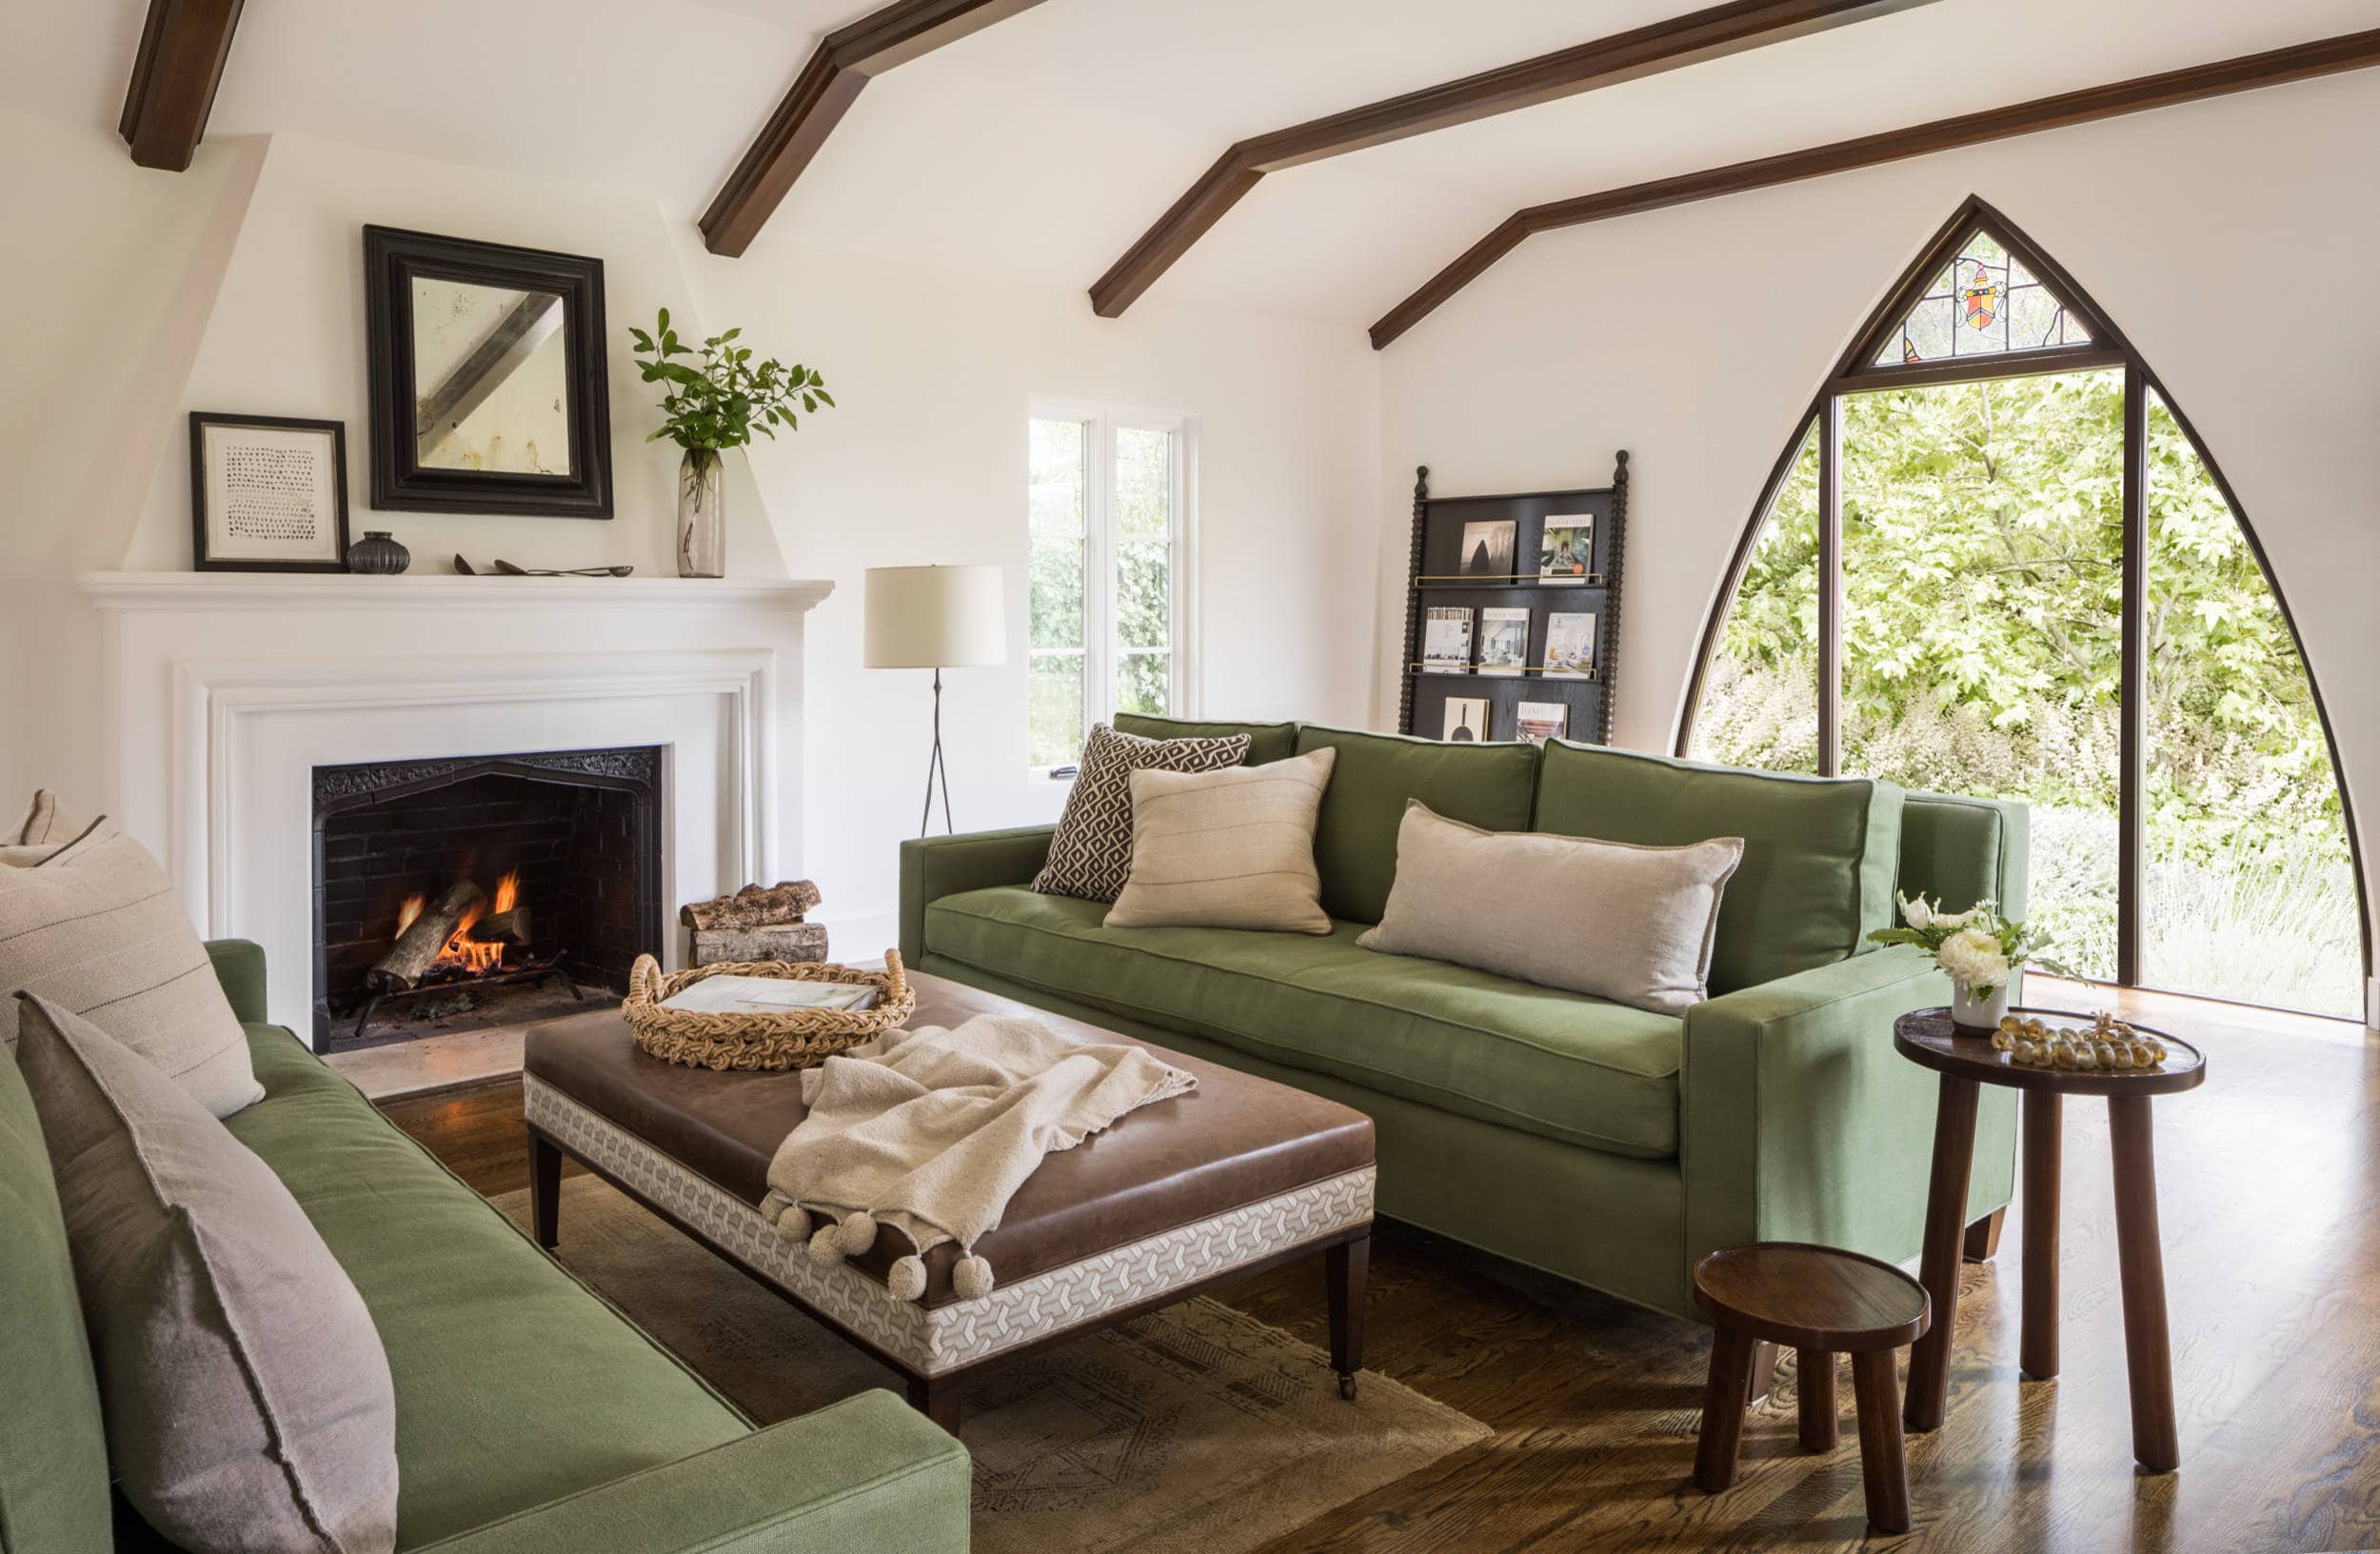 California Casual Design home tour in Hillsborough featuring a Spanish colonial style living room with pointy arched windows and green sofas